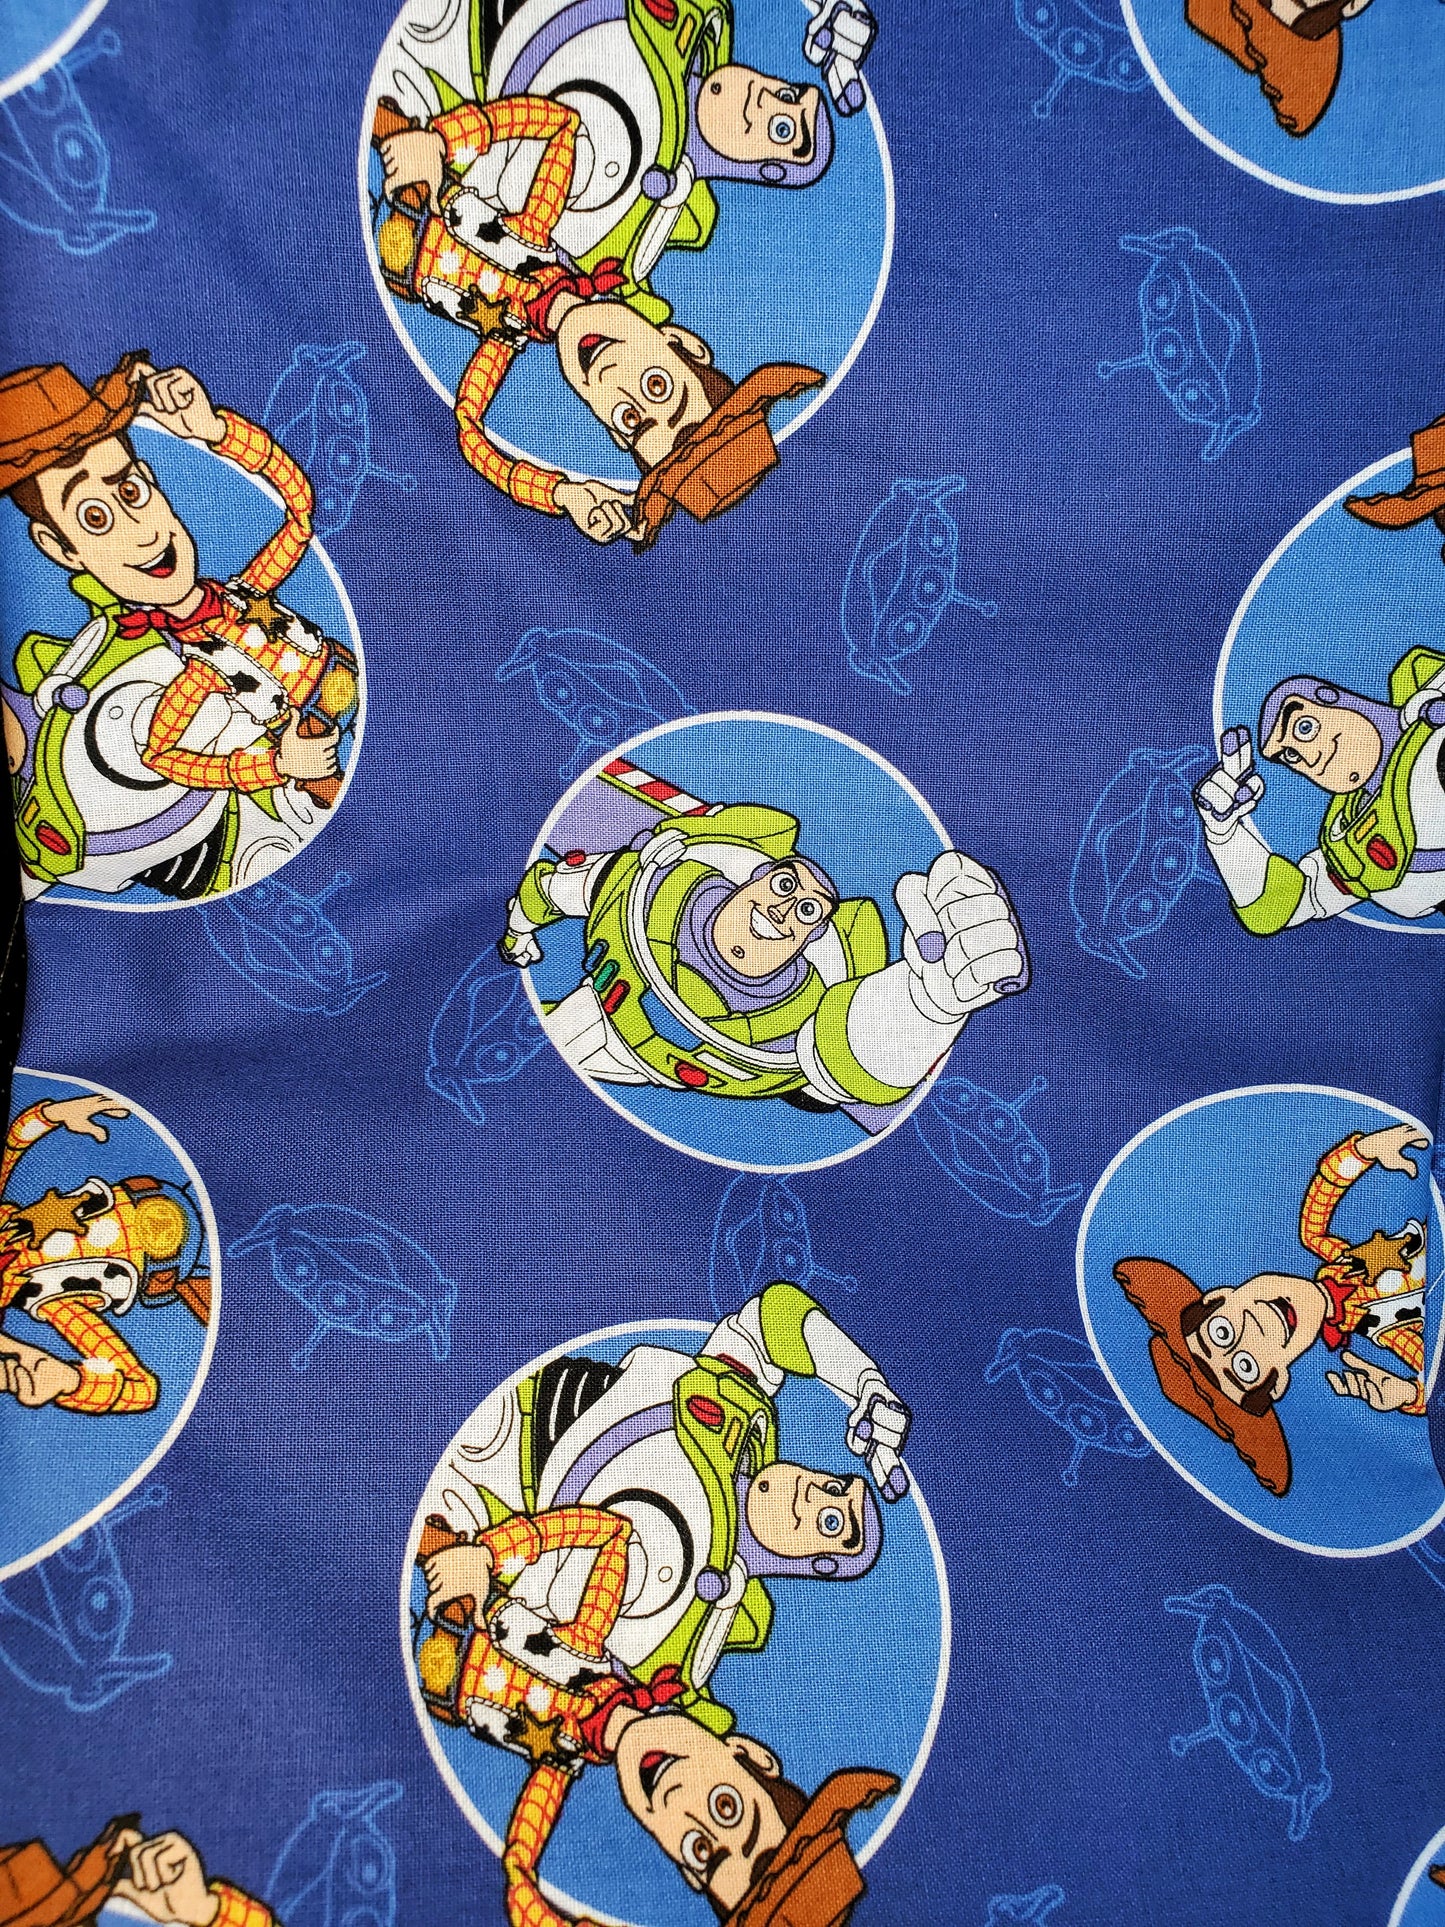 Toy Story 4 Buzz and Woody on Navy Cotton Fabric